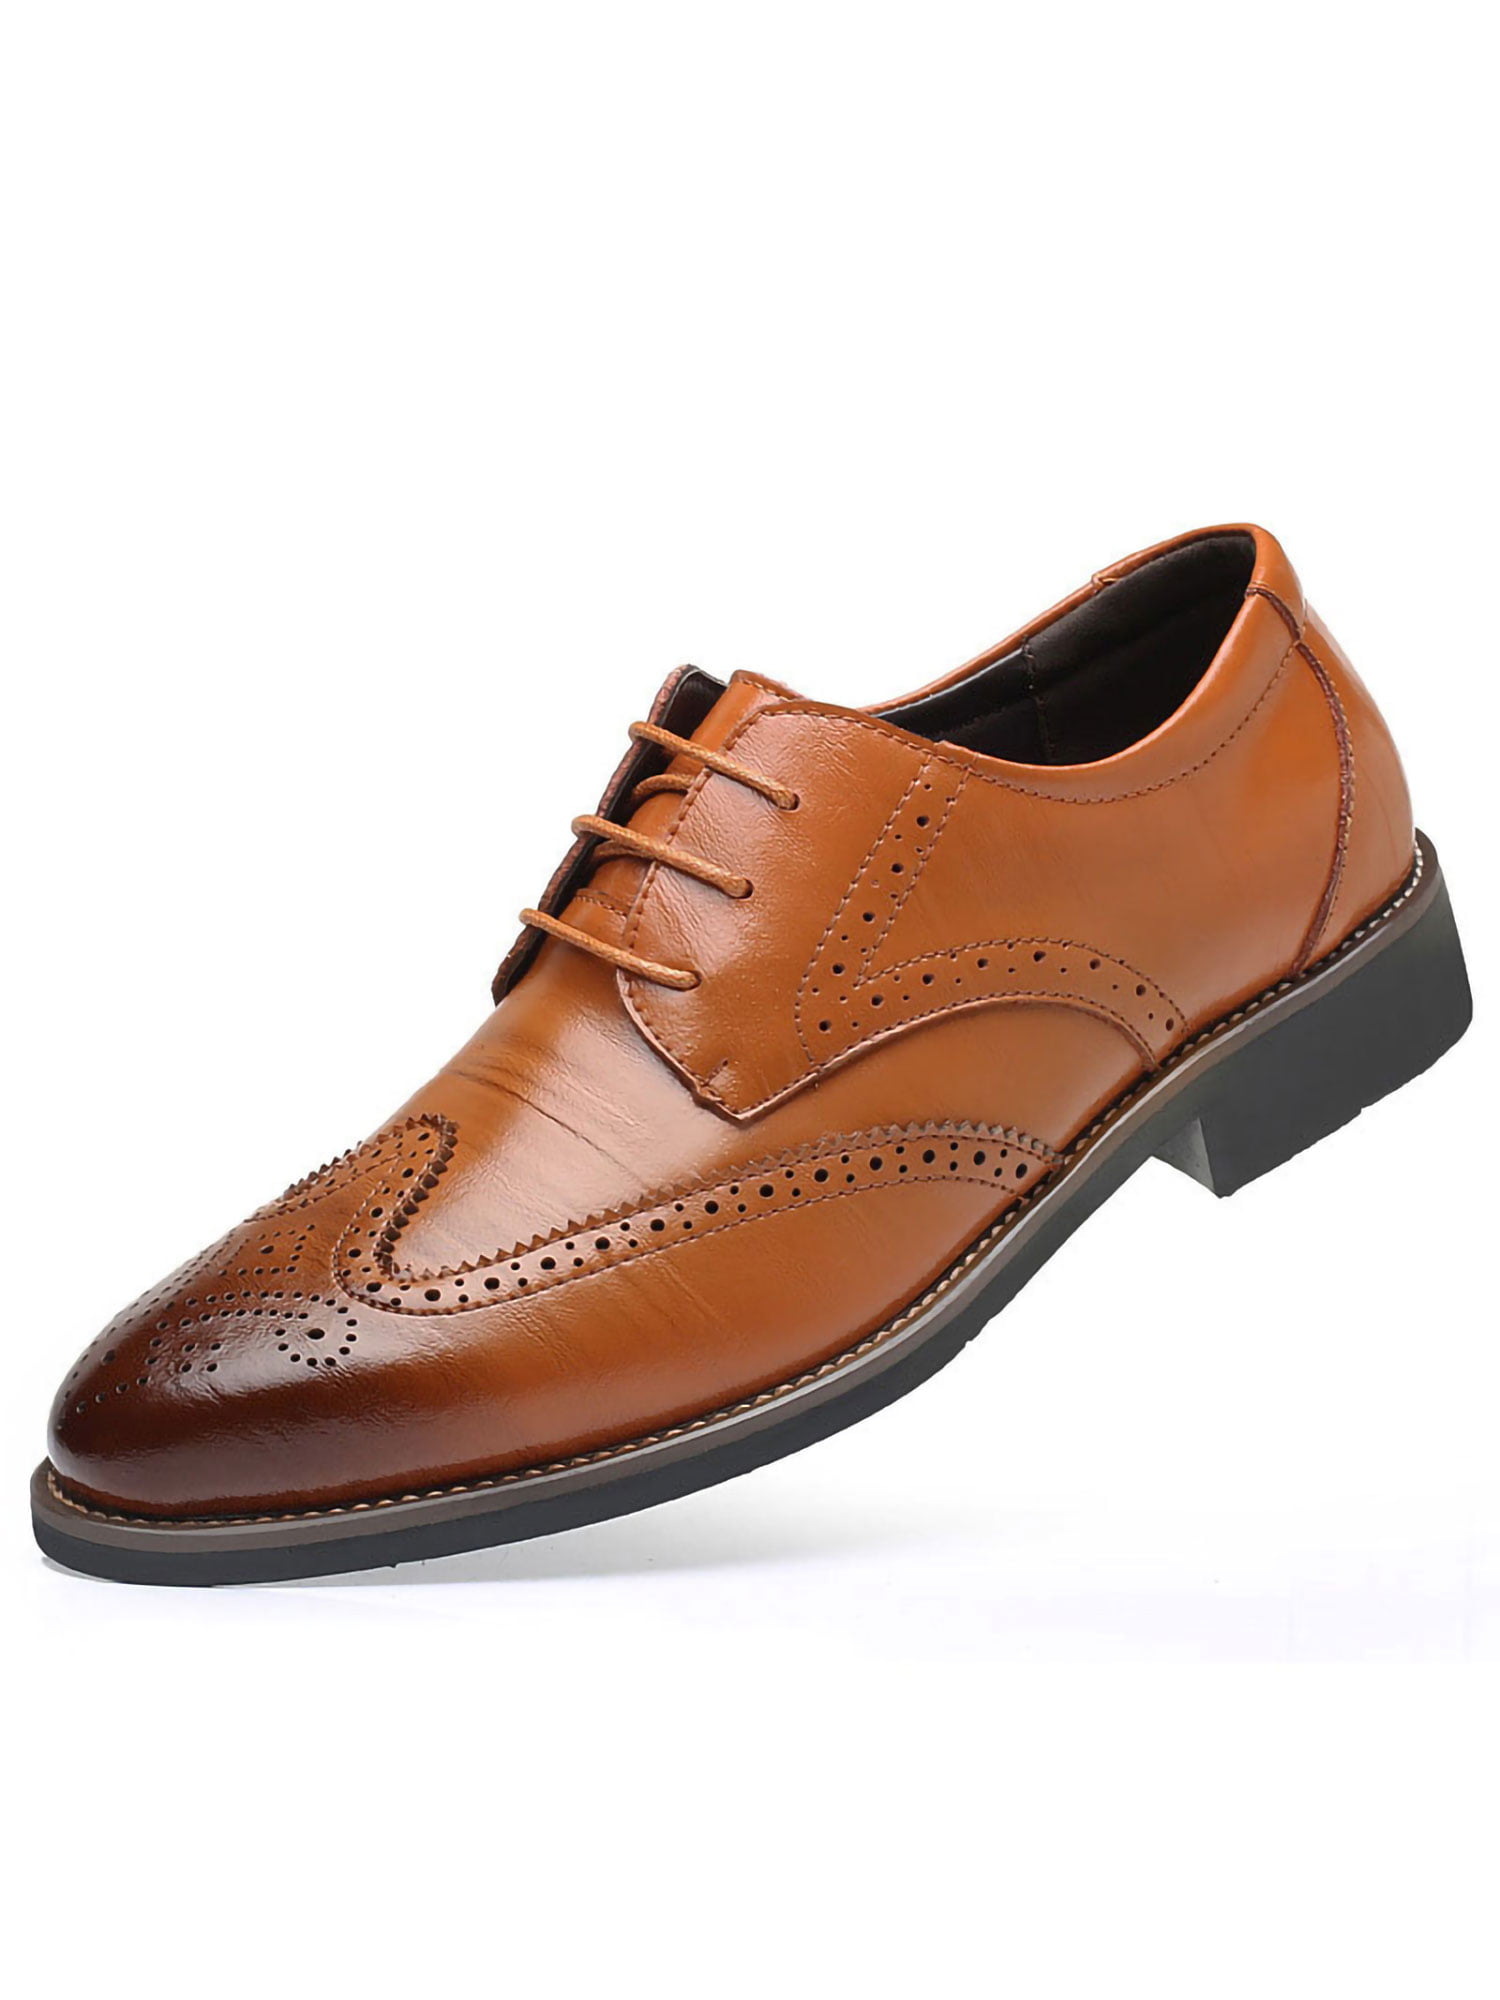 Boys Shoes Leather Lace-Up Smart Brogues Formal Oxford Wedding Party School Shoes Shoes Boys Shoes Oxfords & Wingtips 